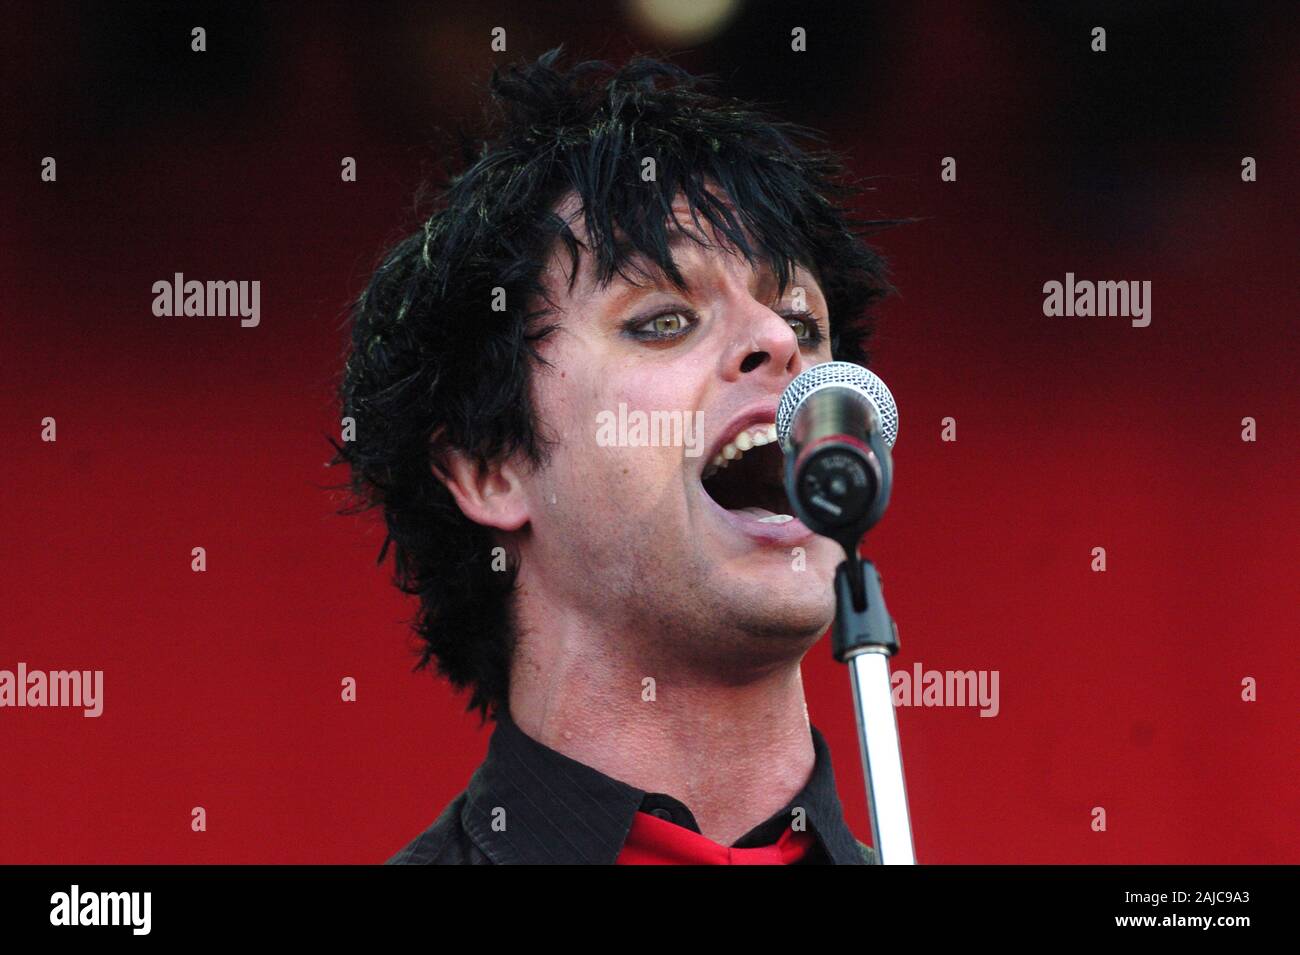 Italy Imola , 10-11-12 June 2005 'Heineken Jammin Festival 2005' Autodromo di Imola: The Green Day singer and guitarist, Billie Joe Armstrong, during the concert Stock Photo